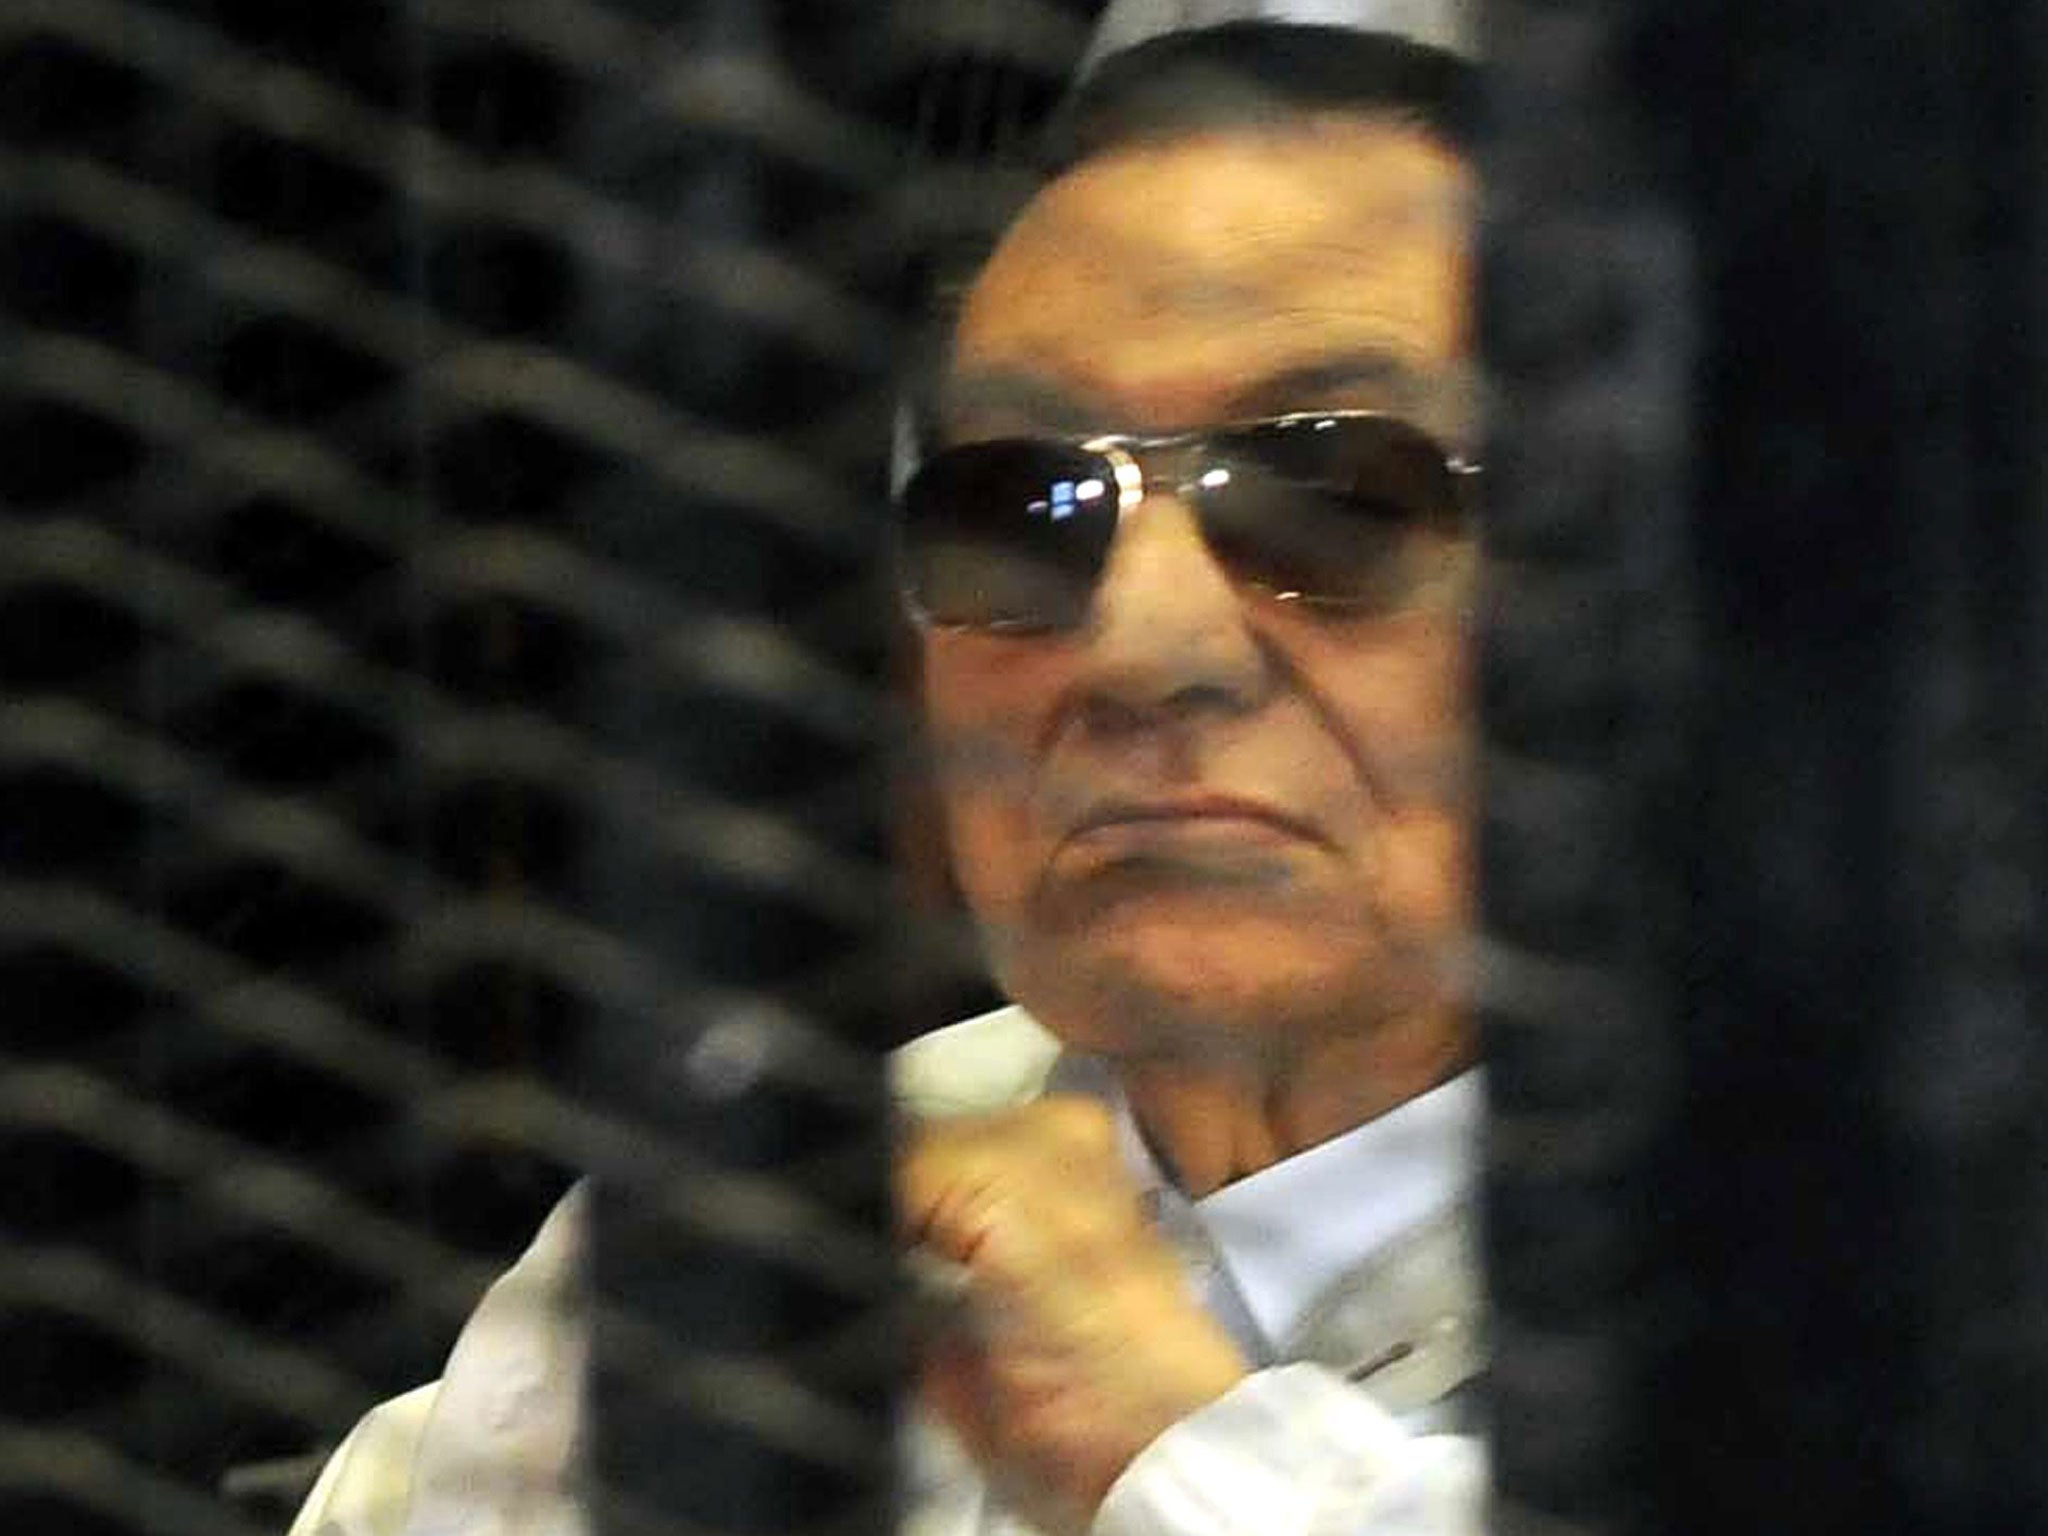 In parallel trial sessions, Egyptian courts have heard cases against ousted President Hosni Mubarak, pictured, and top leaders of his arch rival, the Muslim Brotherhood, related to killings during the 2011 and 2013 protest campaigns that led to their resp